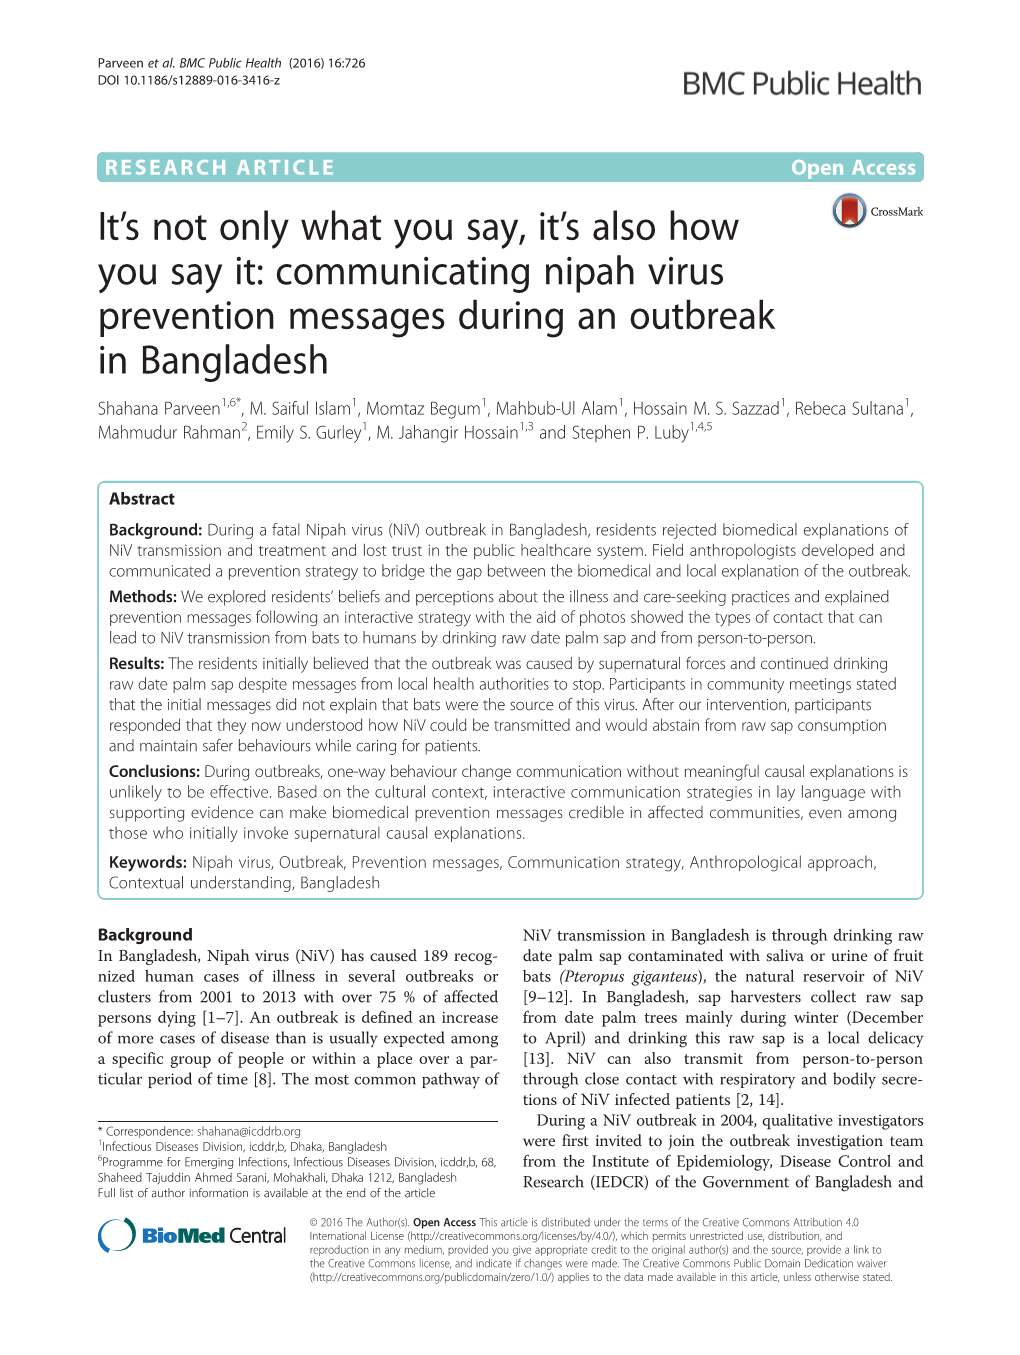 Communicating Nipah Virus Prevention Messages During an Outbreak in Bangladesh Shahana Parveen1,6*, M